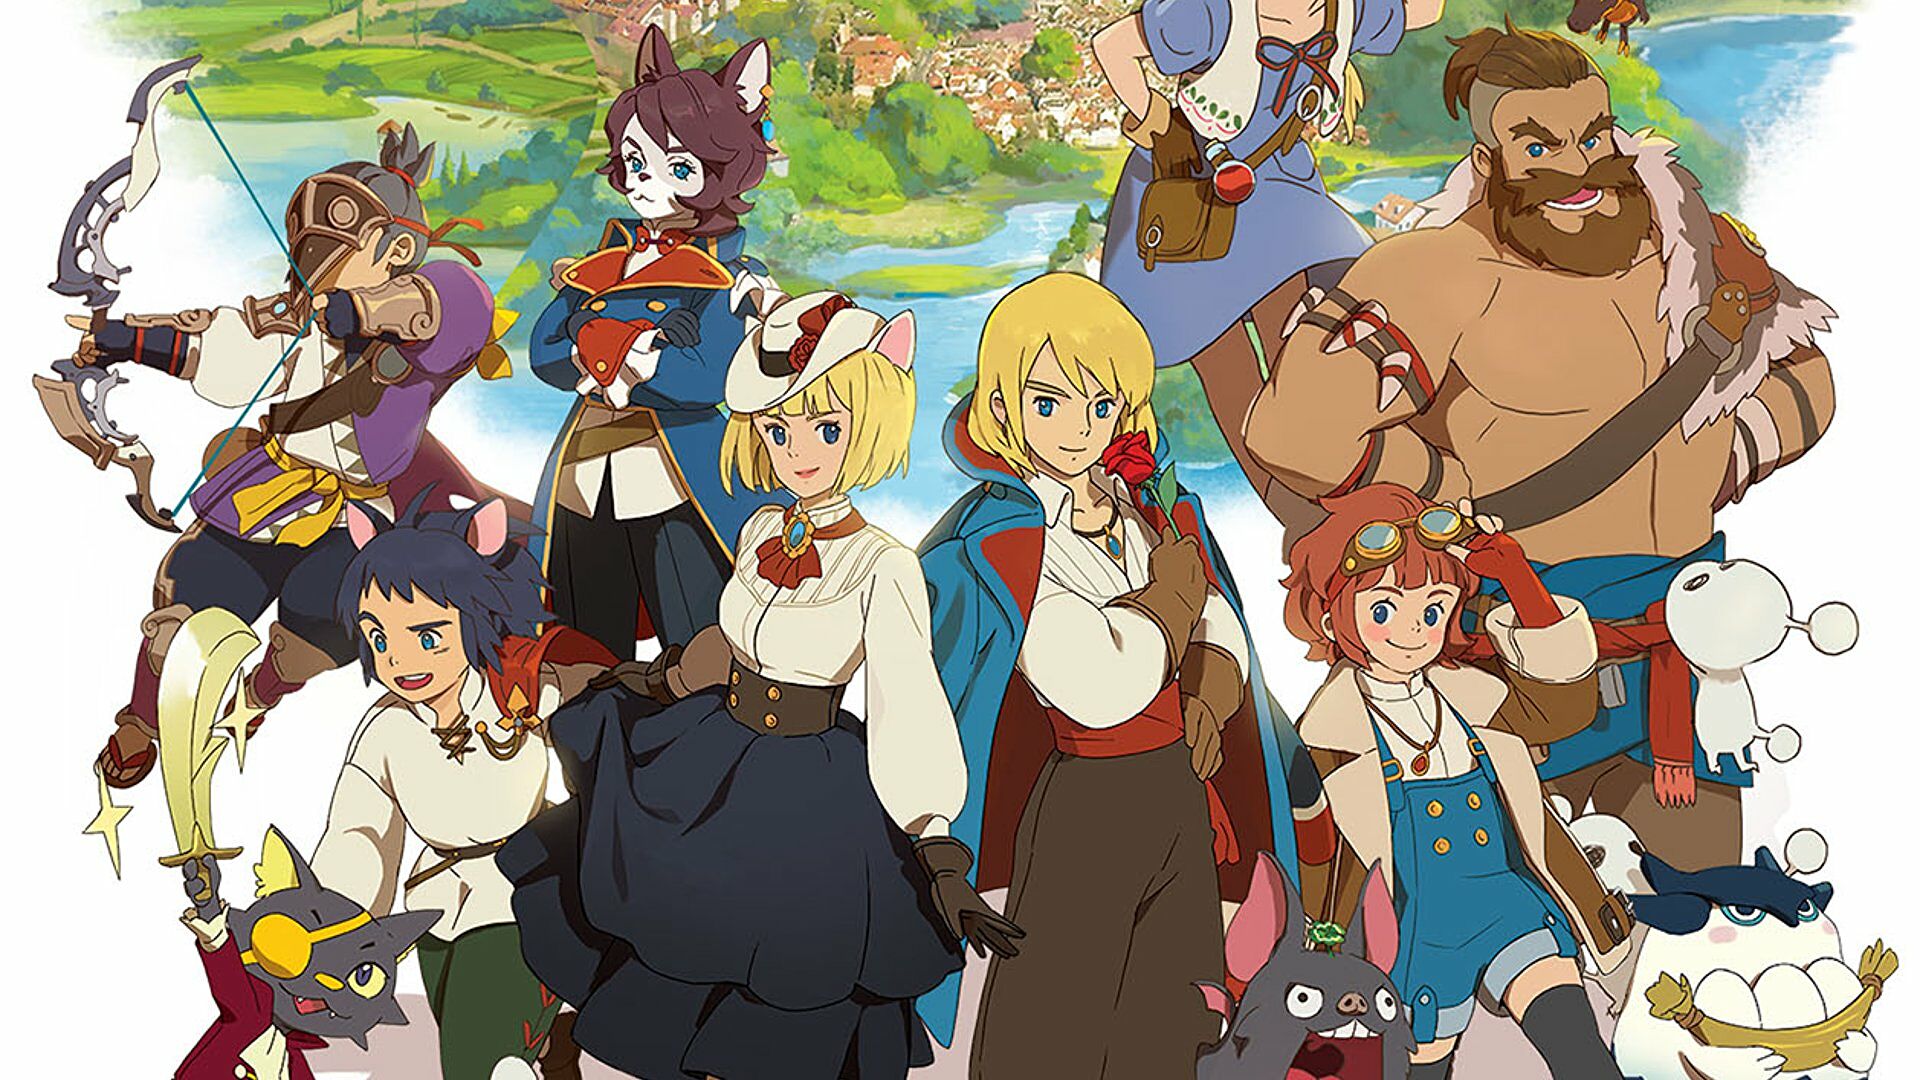 The protagonists of Ni no Kuni depicted in key art.